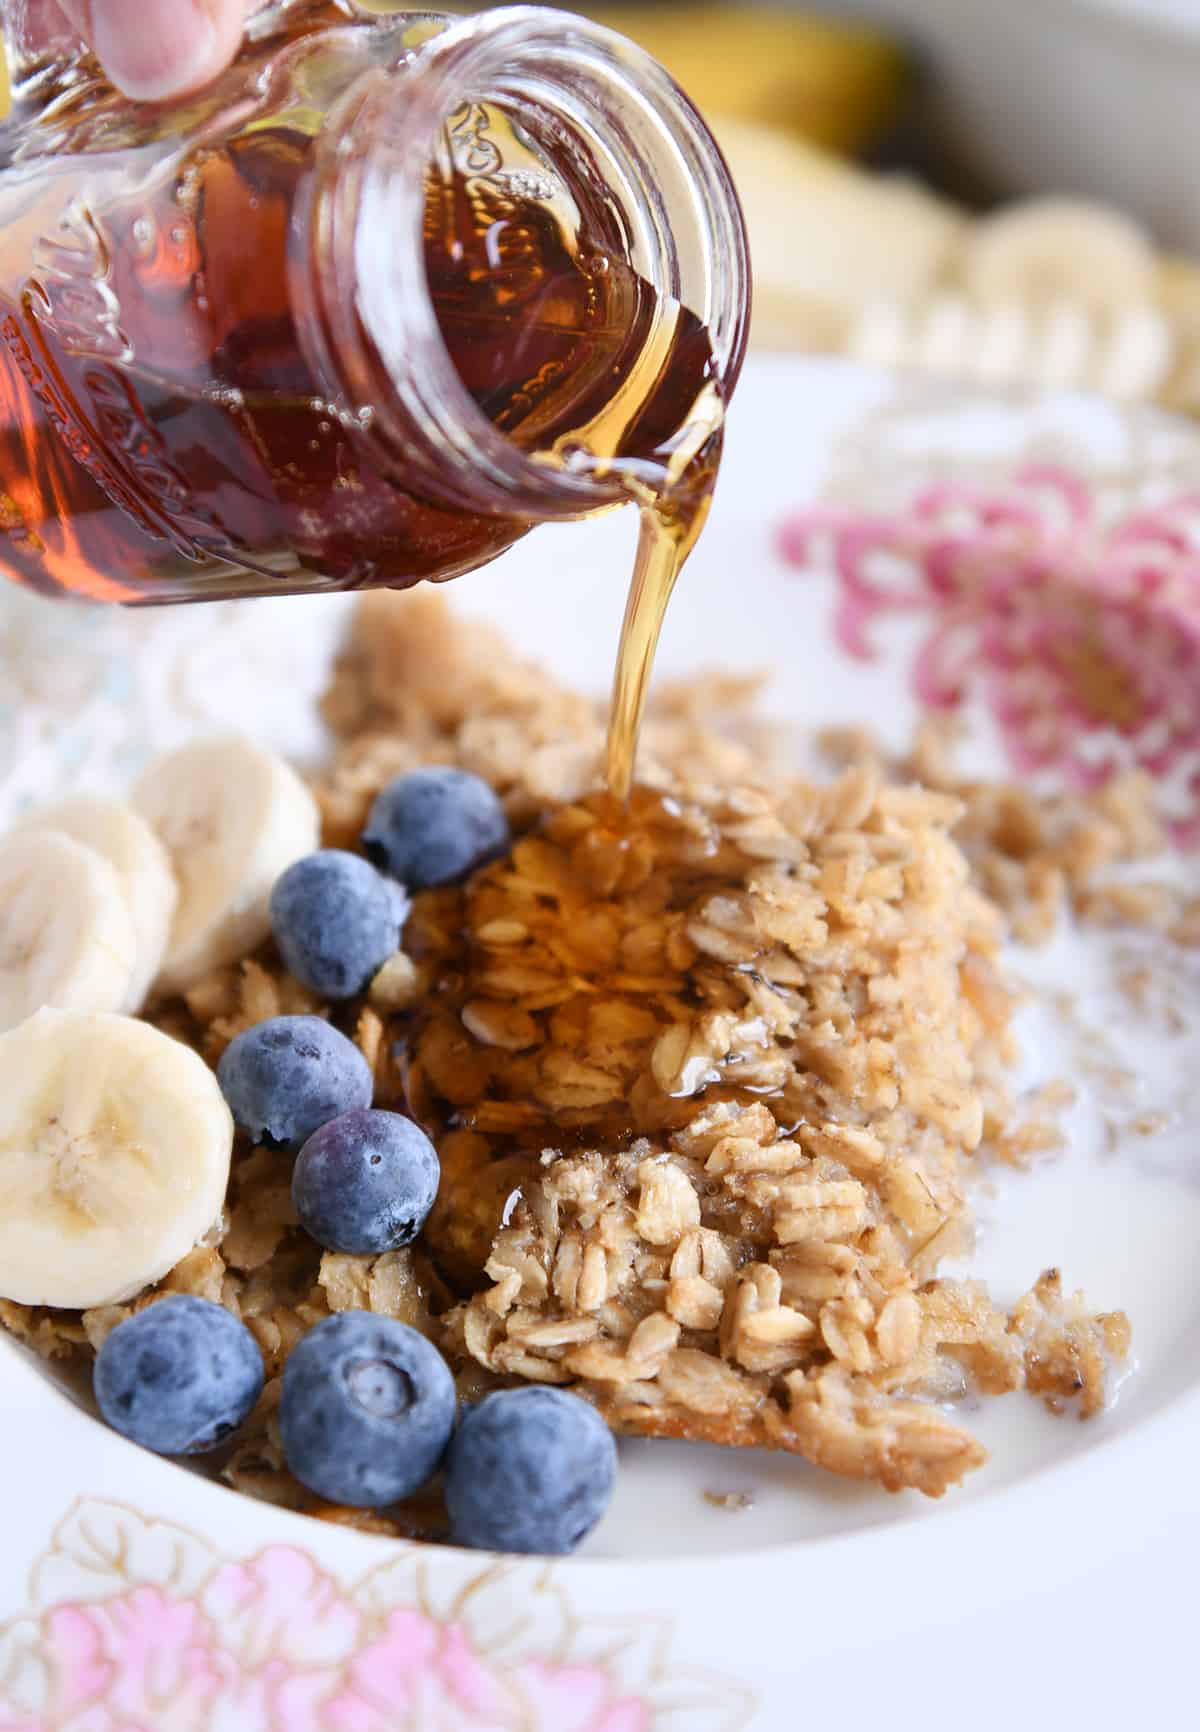 Pour the maple syrup over a bowl of cooked Amish oatmeal with blueberries and sliced ​​banana